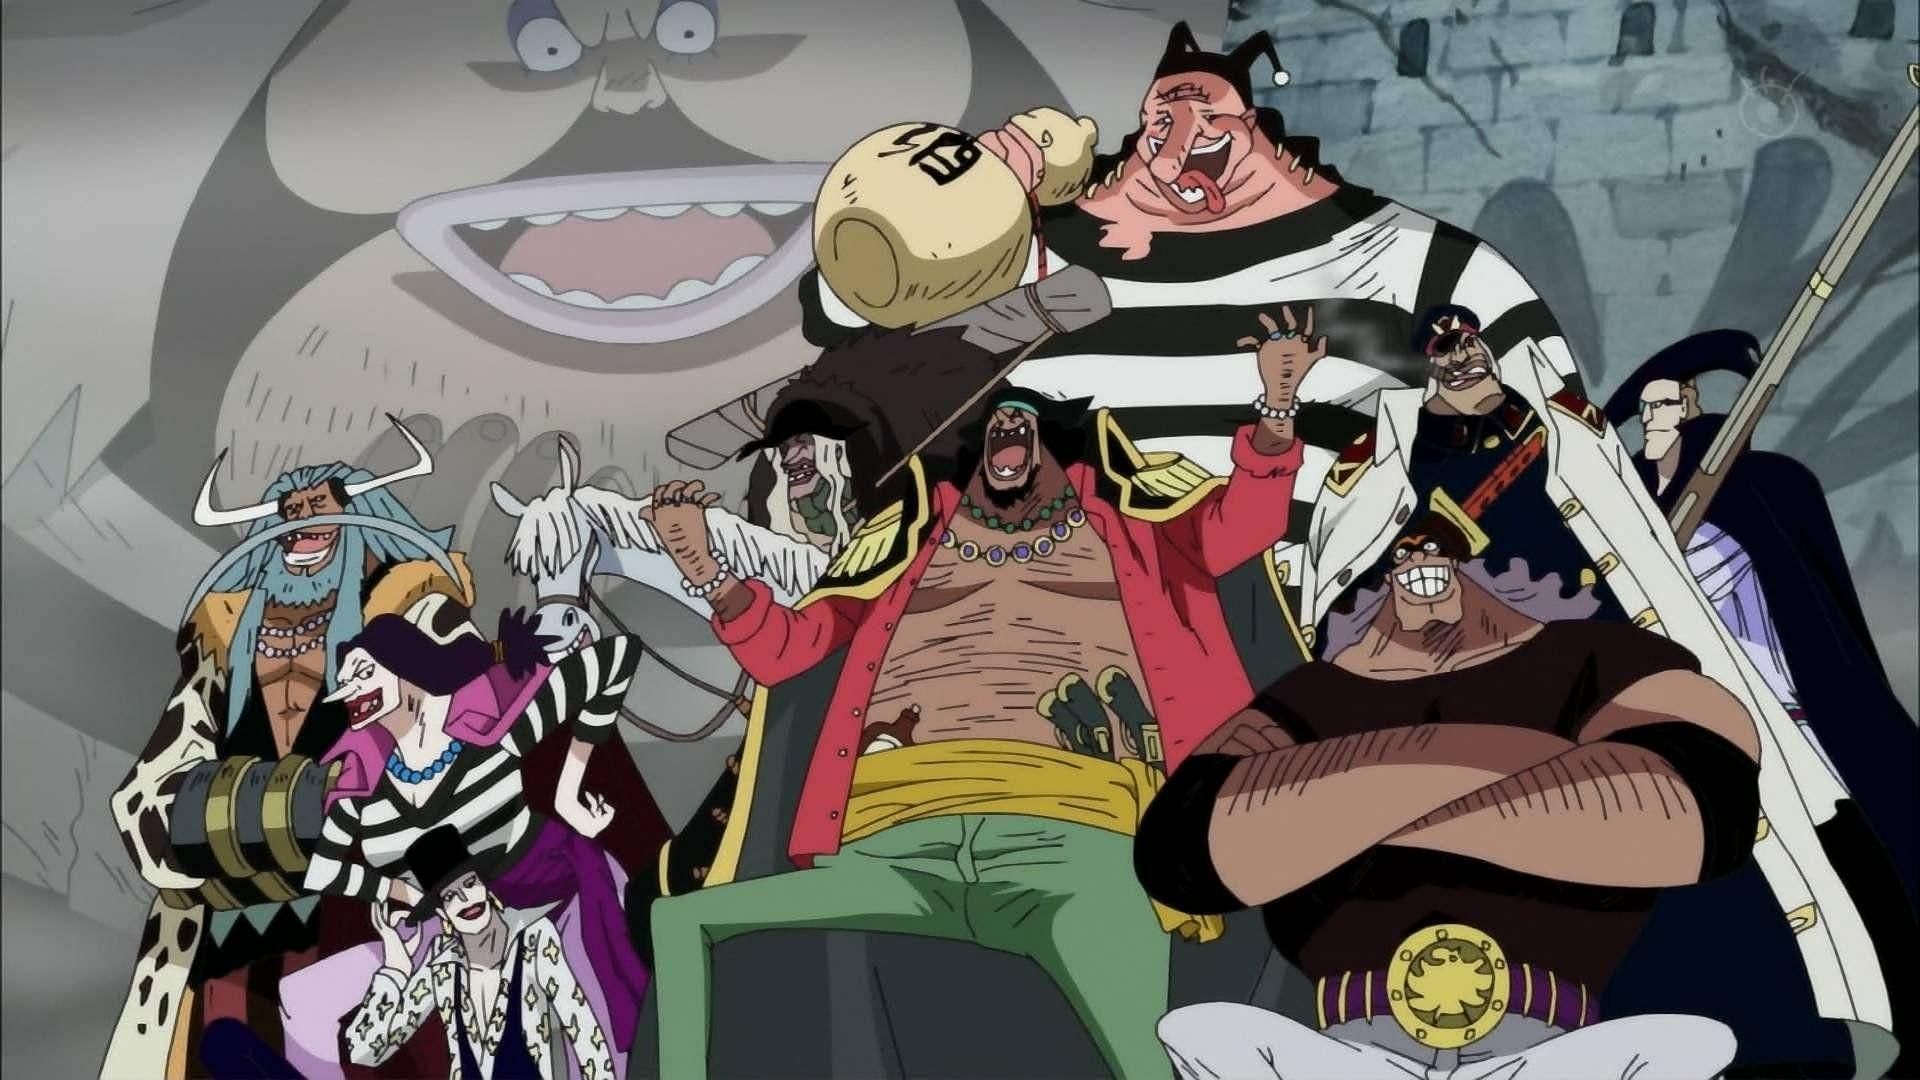 One Piece chapter 1063: Blackbeard vs. Law, new Devil Fruits, and more